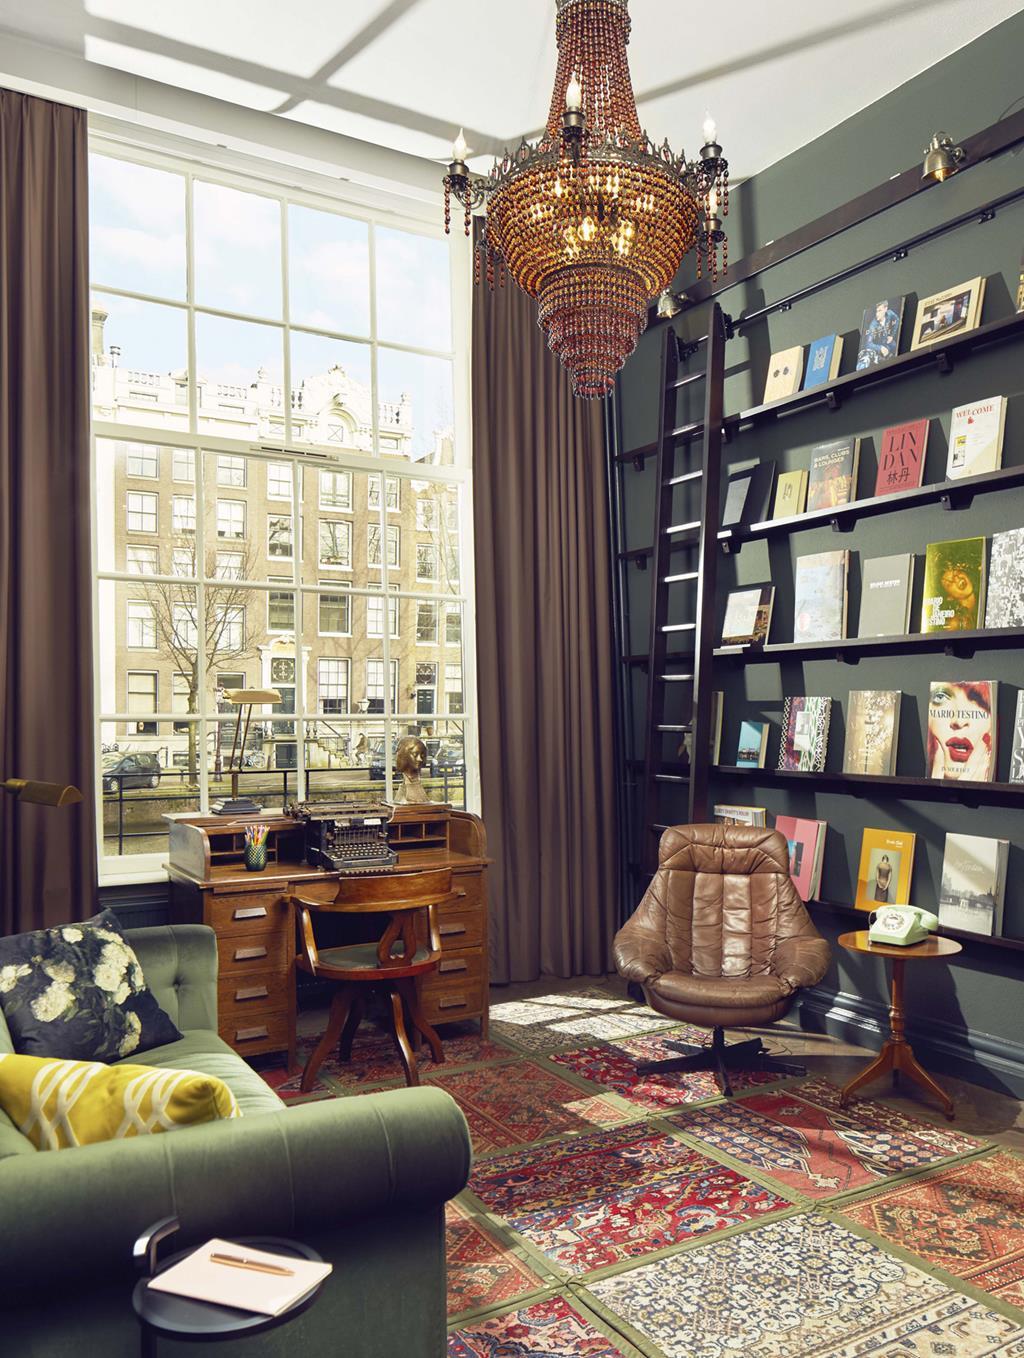 The Book Collector's suite